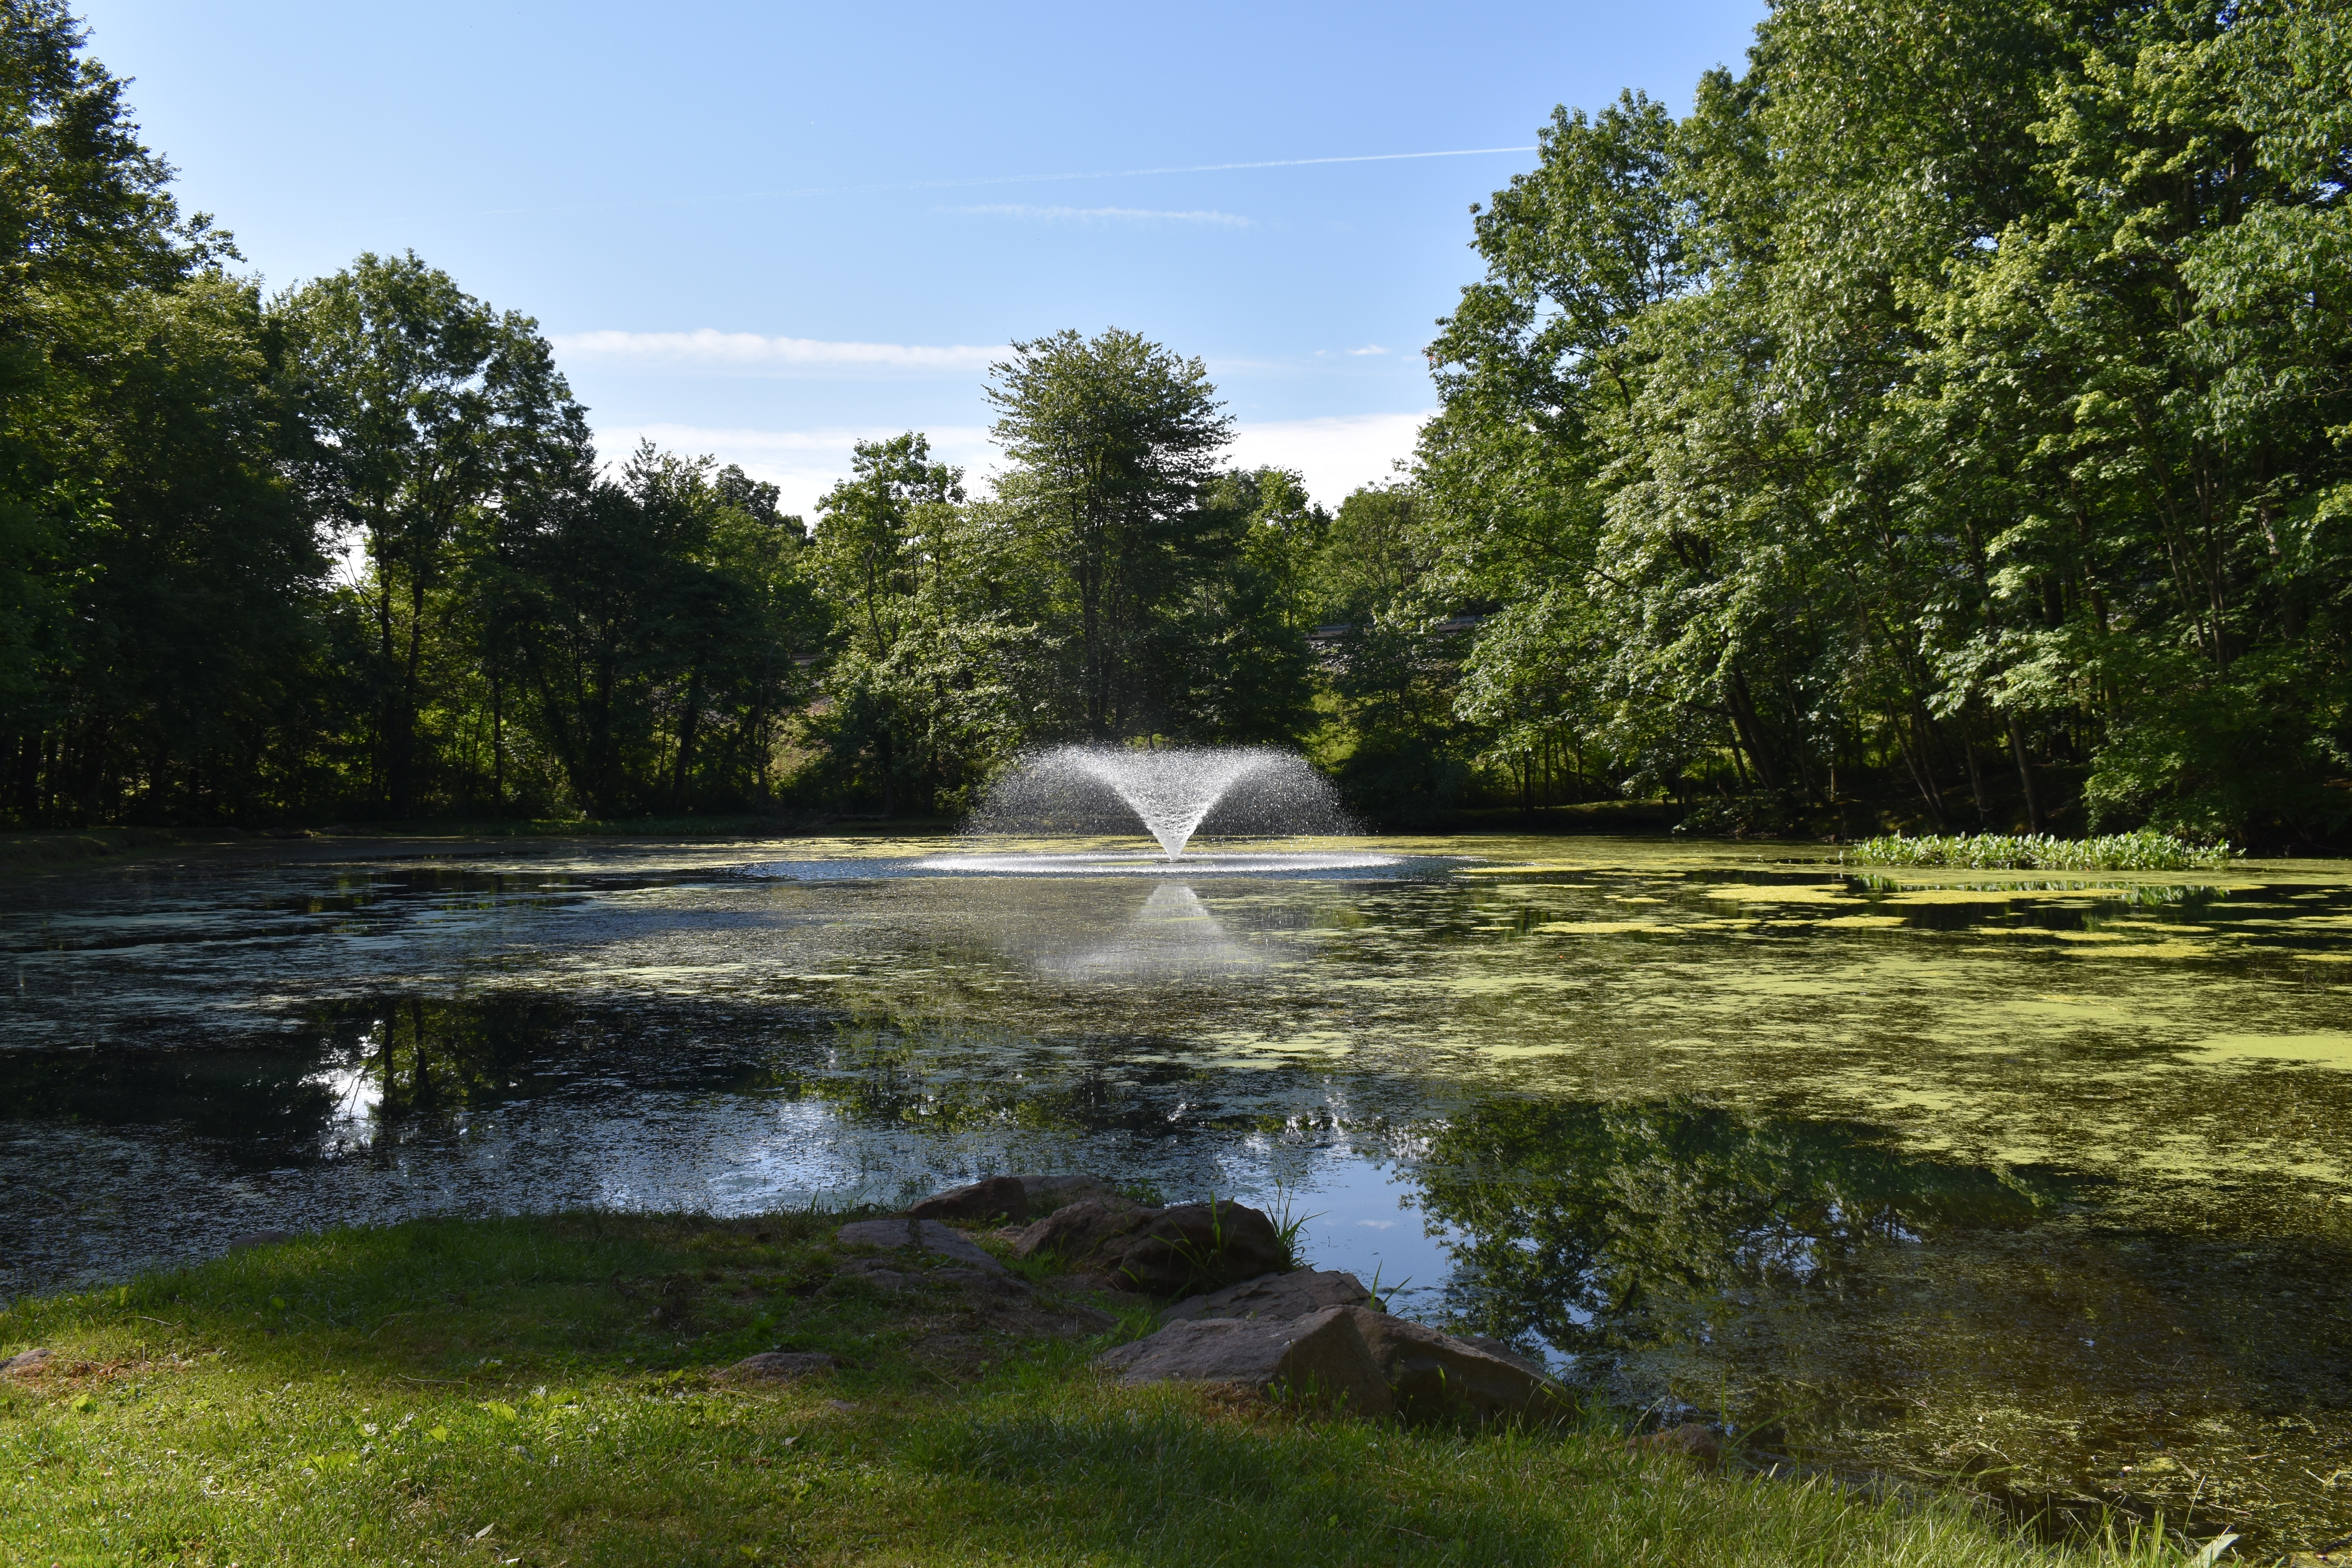 Fountain in the middle of a pond.